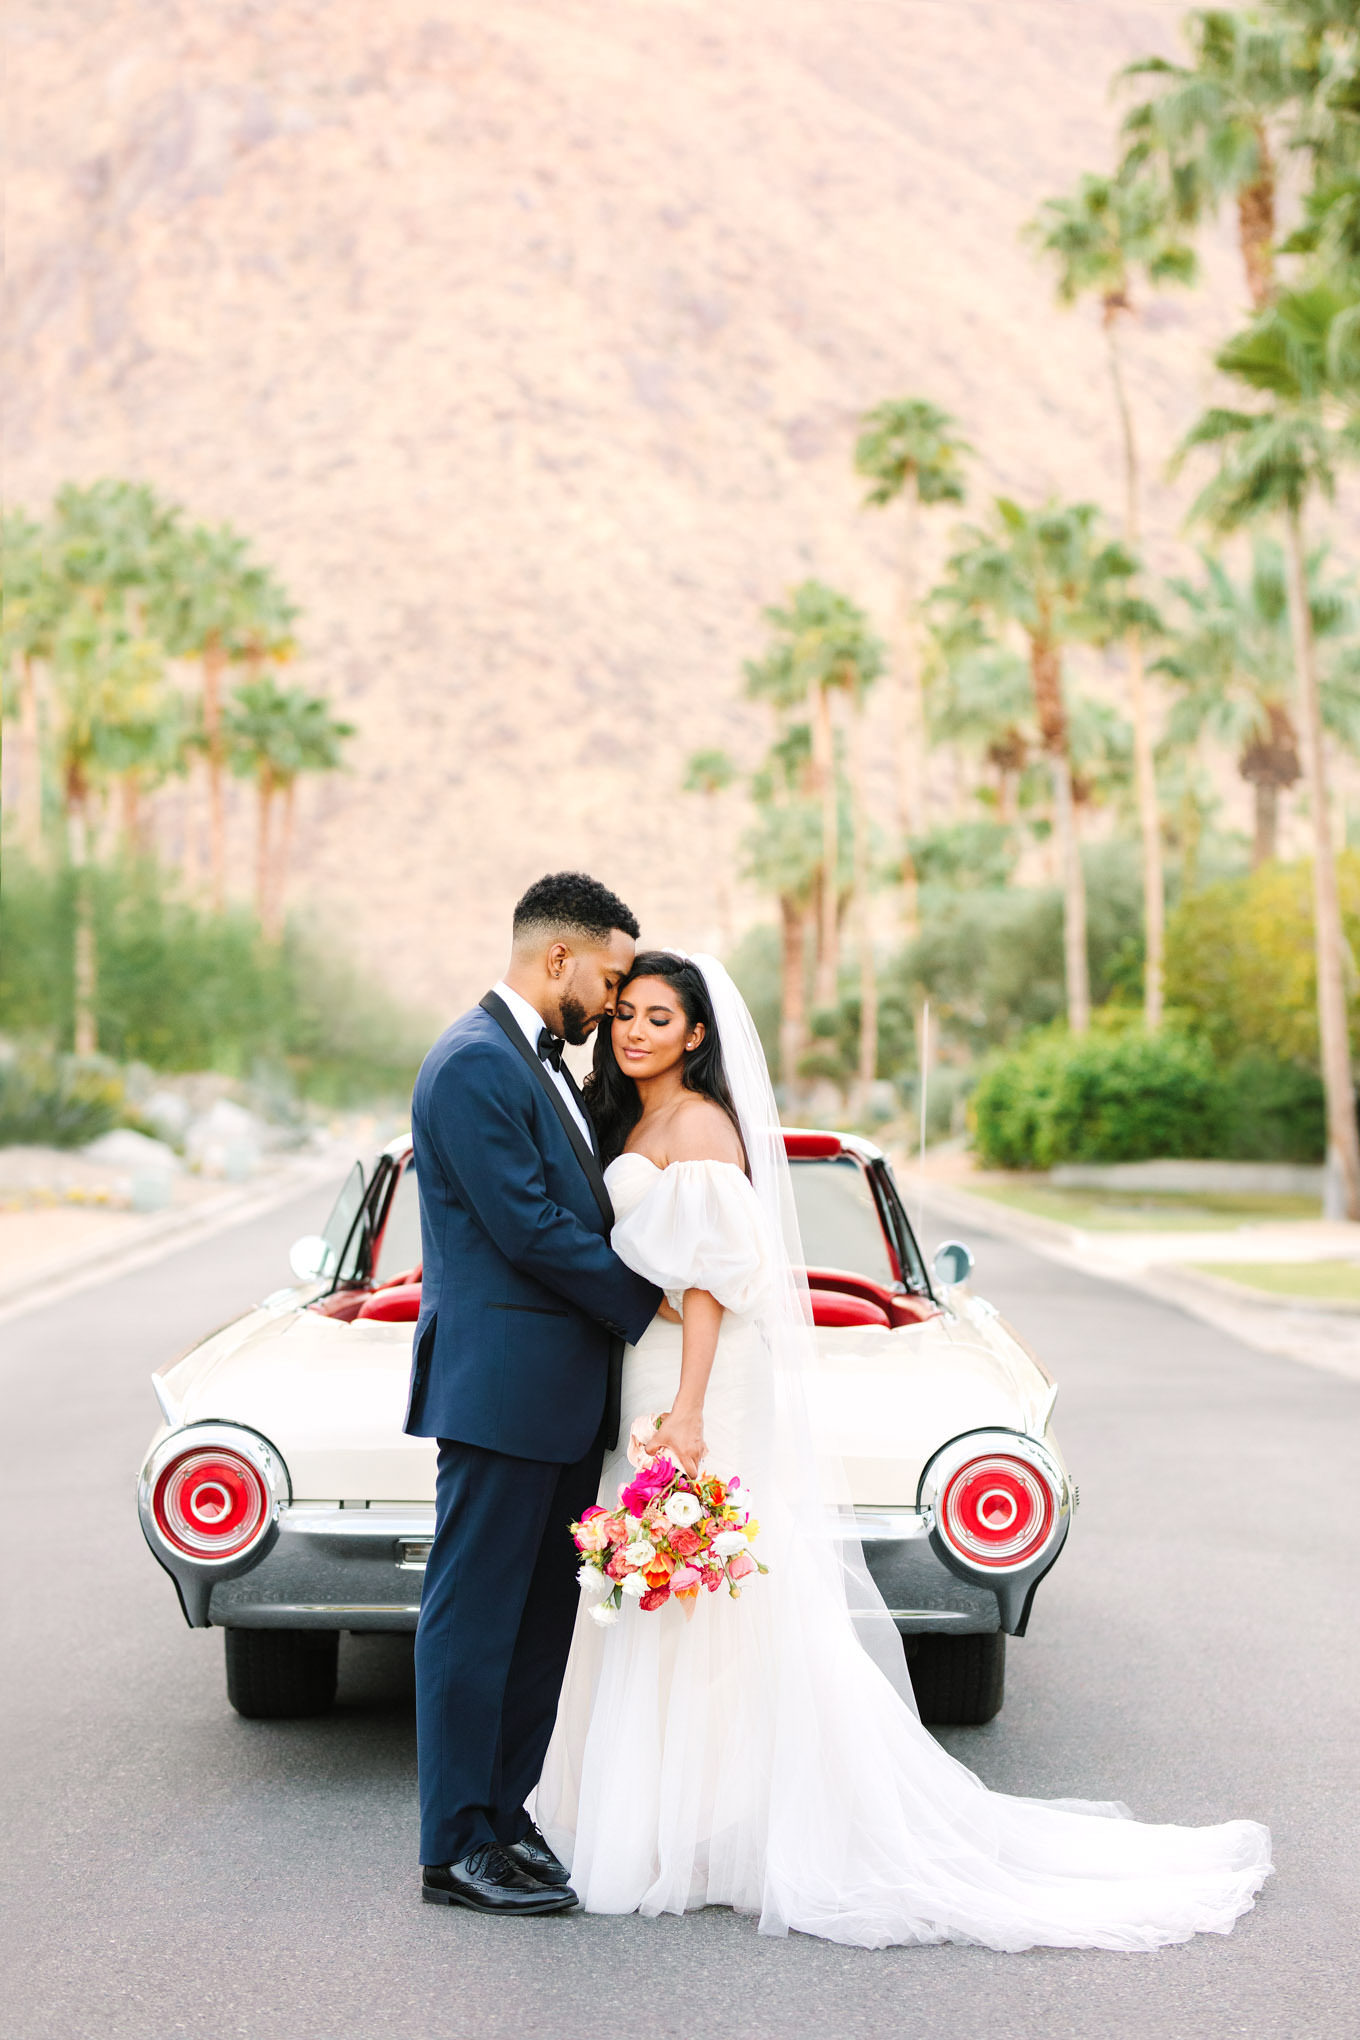 Palm Springs elopement with classic Ford Thunderbird | Engagement, elopement, and wedding photography roundup of Mary Costa’s favorite images from 2020 | Colorful and elevated photography for fun-loving couples in Southern California | #2020wedding #elopement #weddingphoto #weddingphotography   Source: Mary Costa Photography | Los Angeles